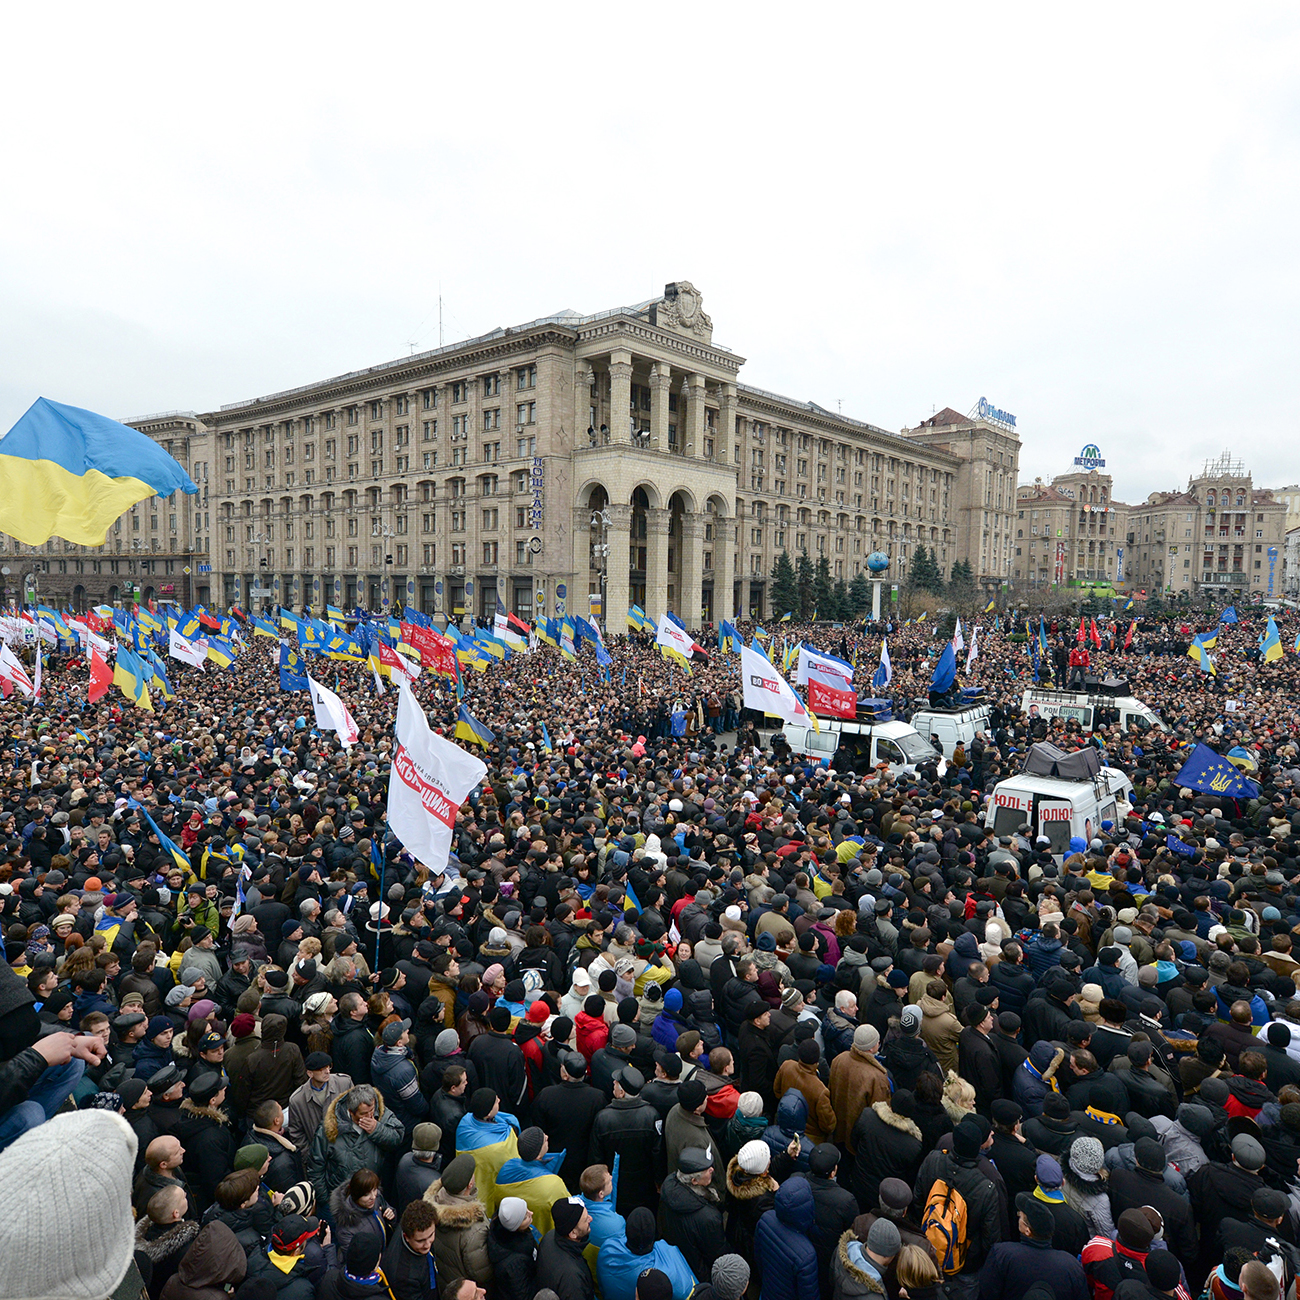 Large crowd of protestors, many holding flags, in Maidan Square in Kiev